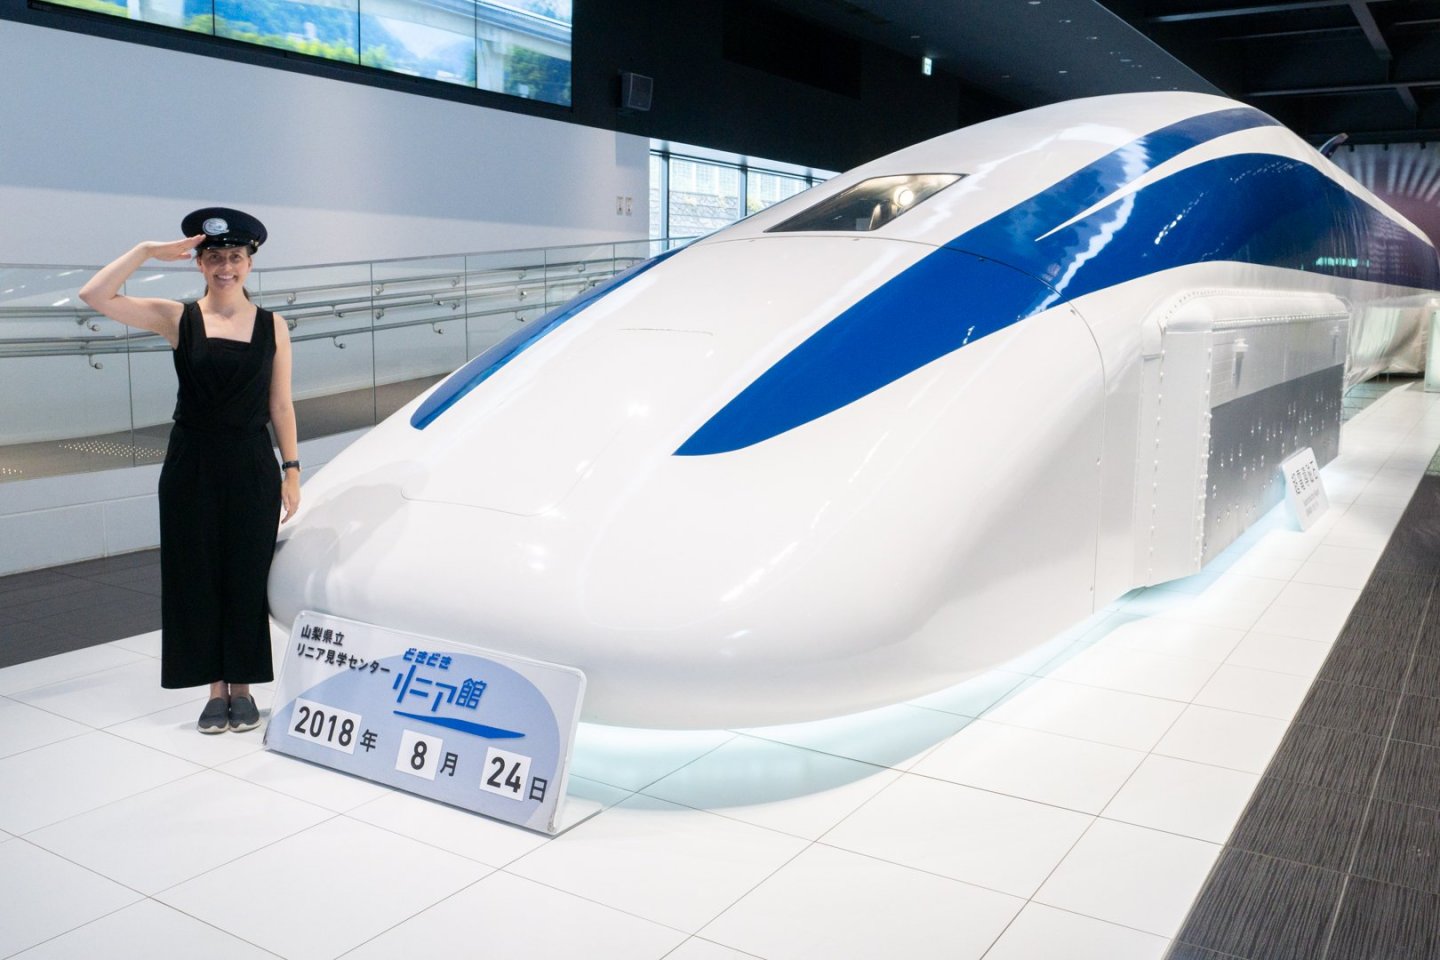 Japanese Redesigned The High-Speed Train With Magnetic Levitation Technology